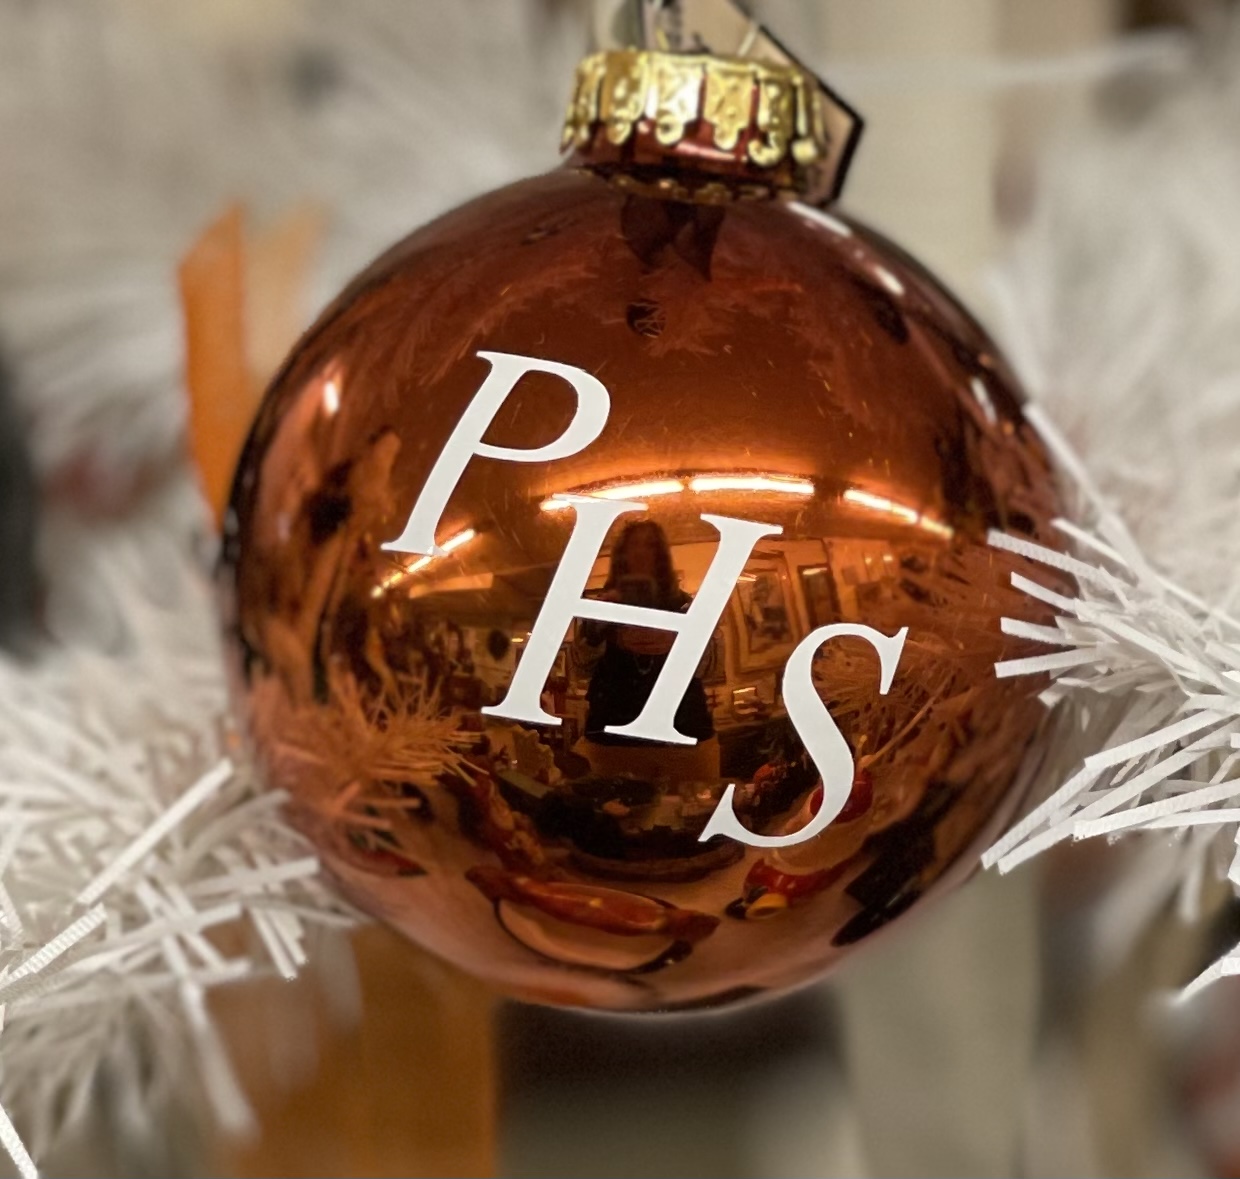 PHS Christmas Ornament
PHS in white on one side and the Panther paw on the other!
Orange
Size: Standard